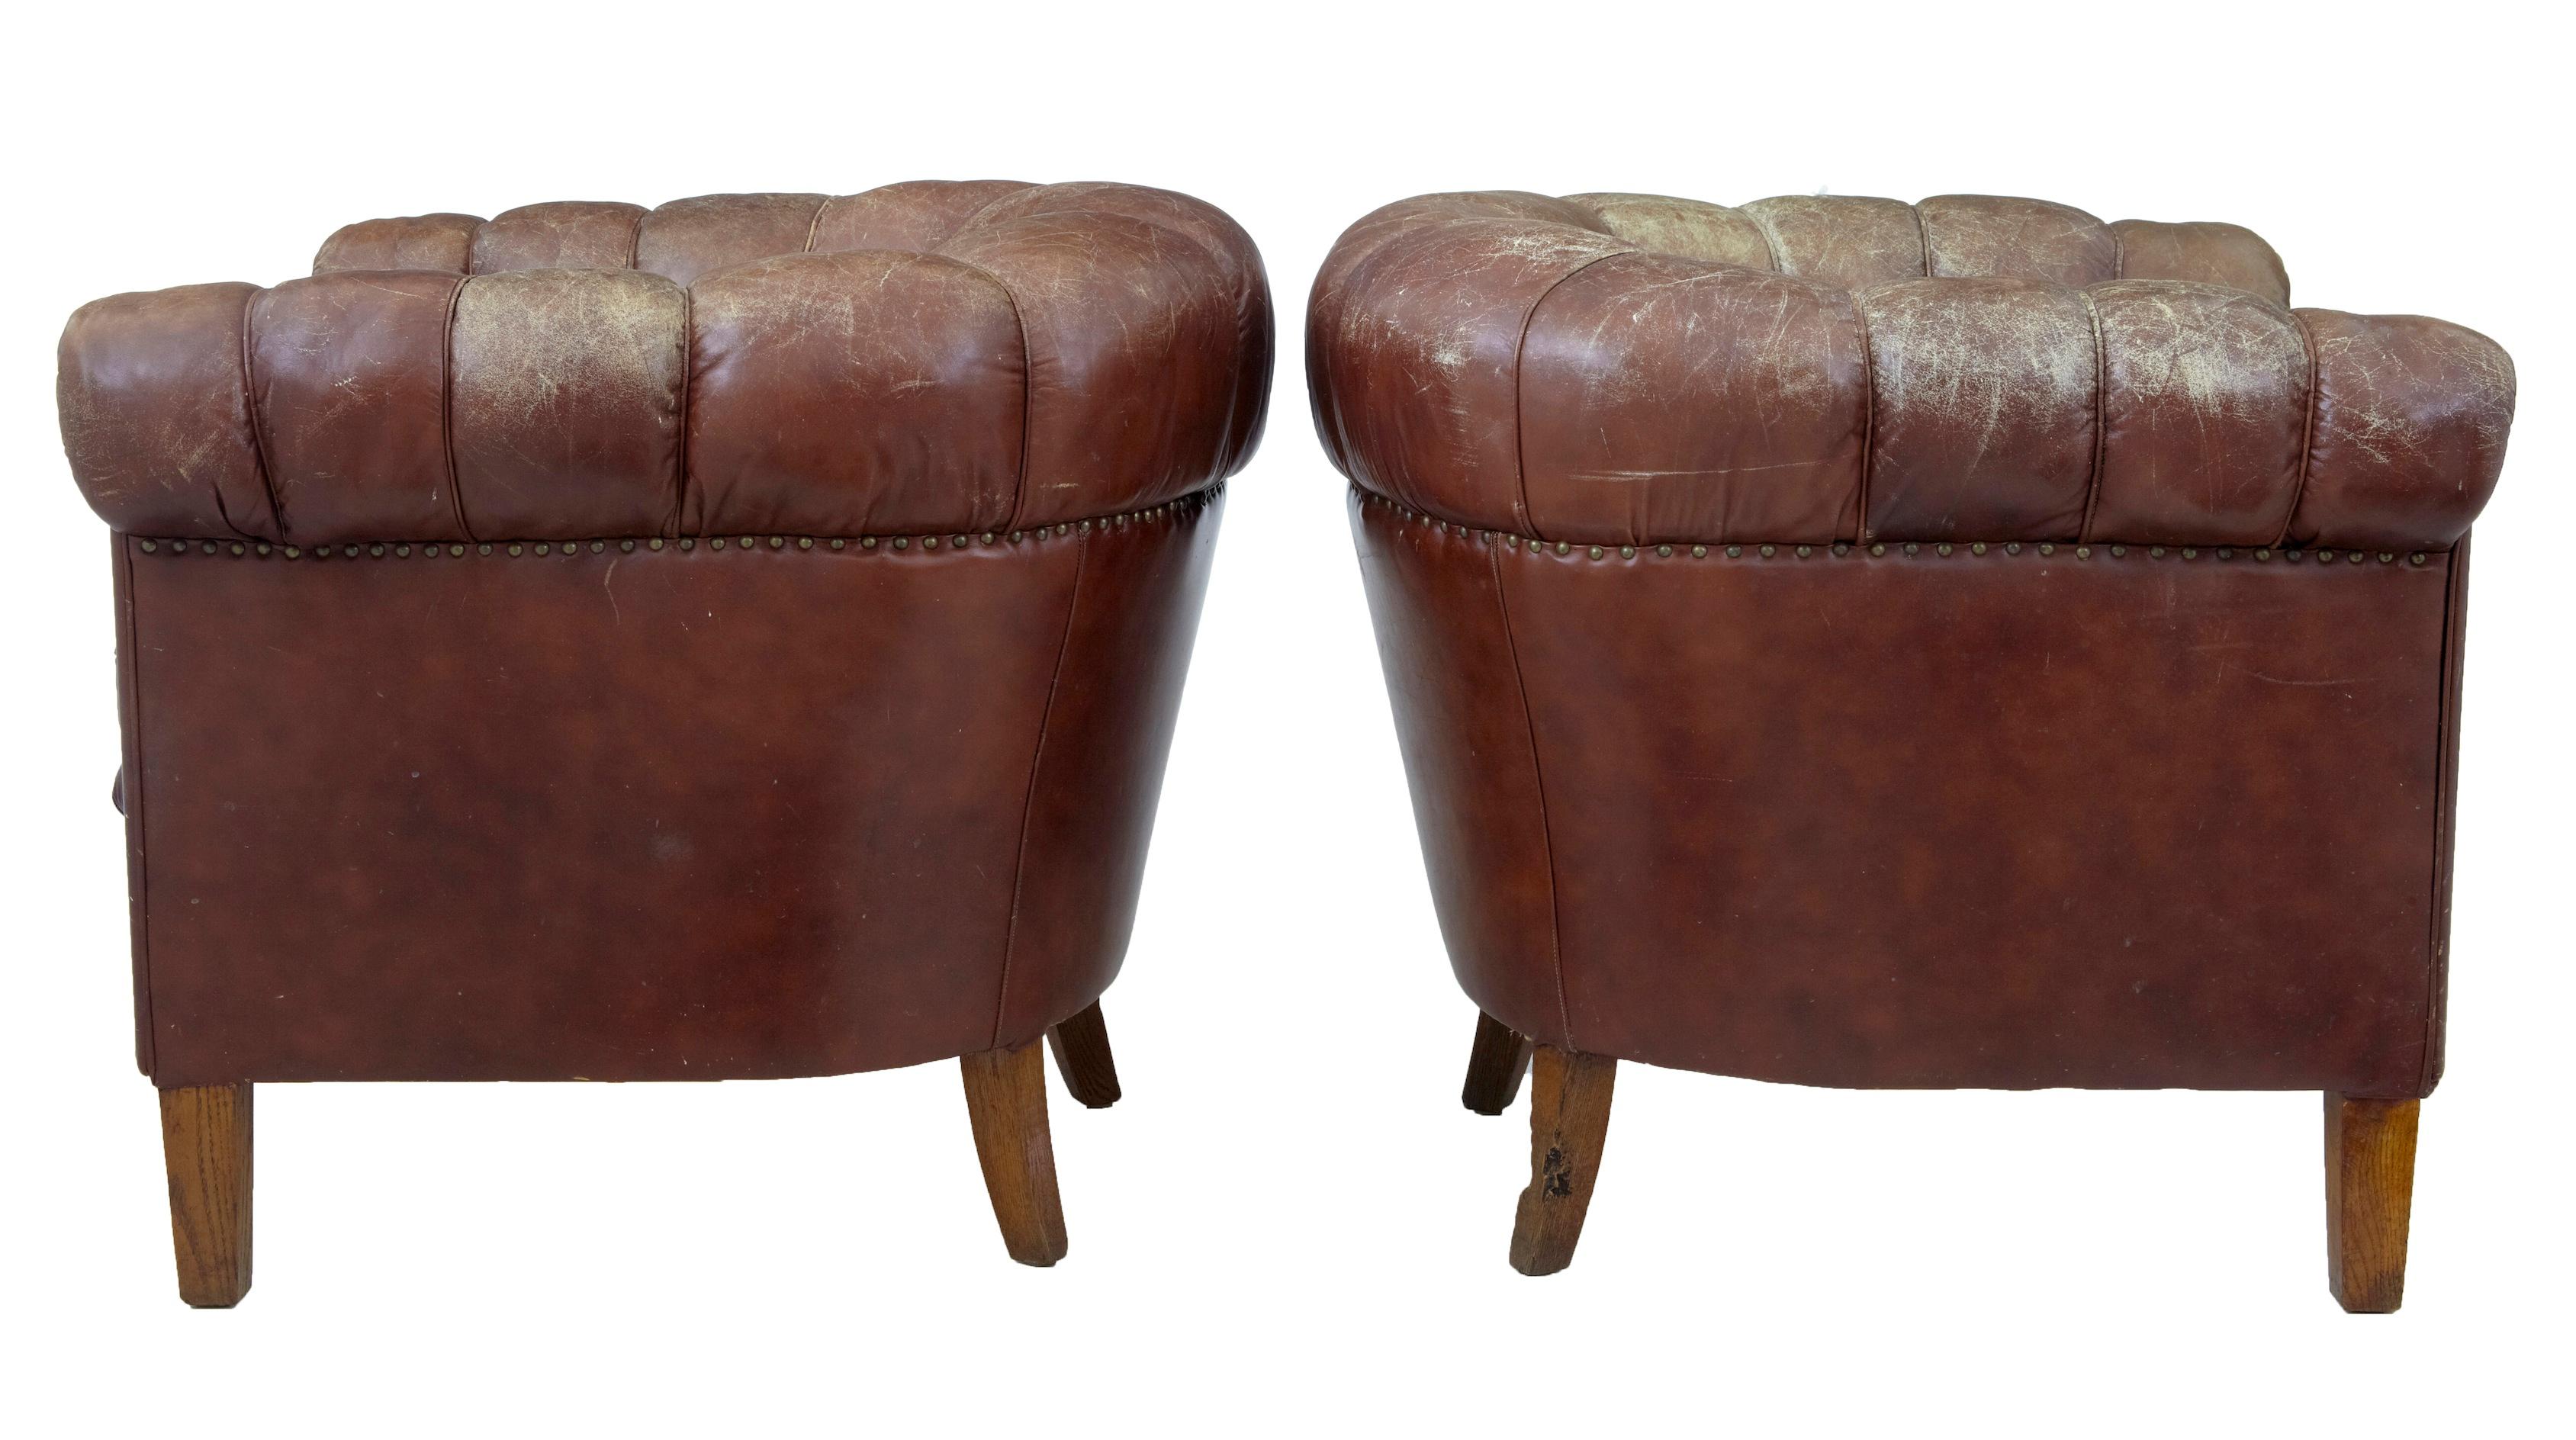 Comfortable pair of 1920s leather button back armchairs.
Over stuffed roll top arms, with separate seat cushion.
Standing on oak legs.
Some splits and marks to leather, one back leg appears to have been a favourite for a pet and is currently abit